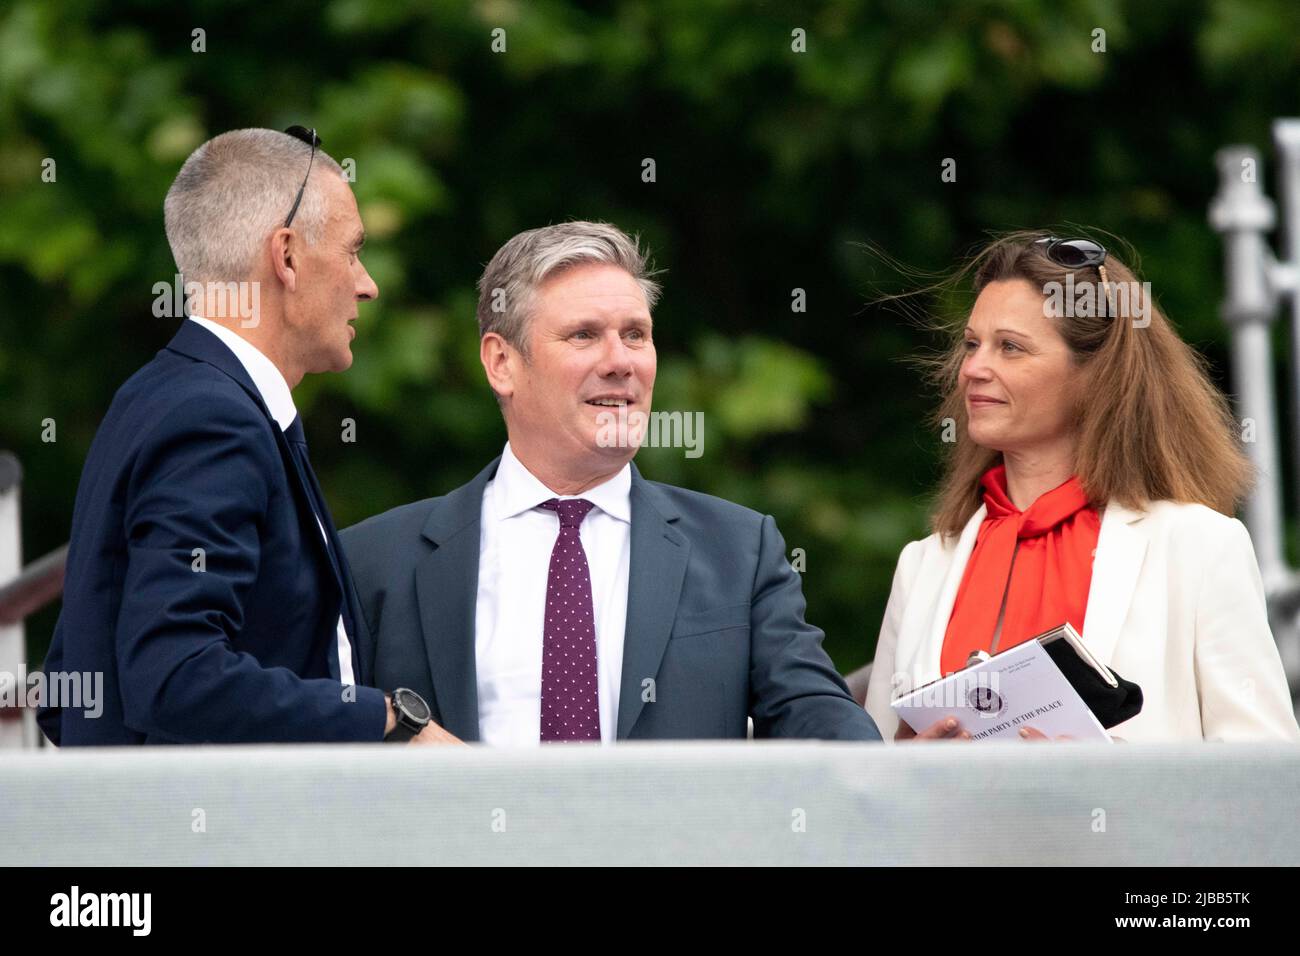 London, UK. 4 June 2022. Politicians including Prime Minister Boris Johnson, Labour Leader Kier Starmer and Home Secretary Priti Patel attend BBC Platinum Party at the Palace. The event is one of four days of Platinum Jubilee celebrations for HM The Queen. Credit: Benjamin Wareing/ Alamy Live News Stock Photo